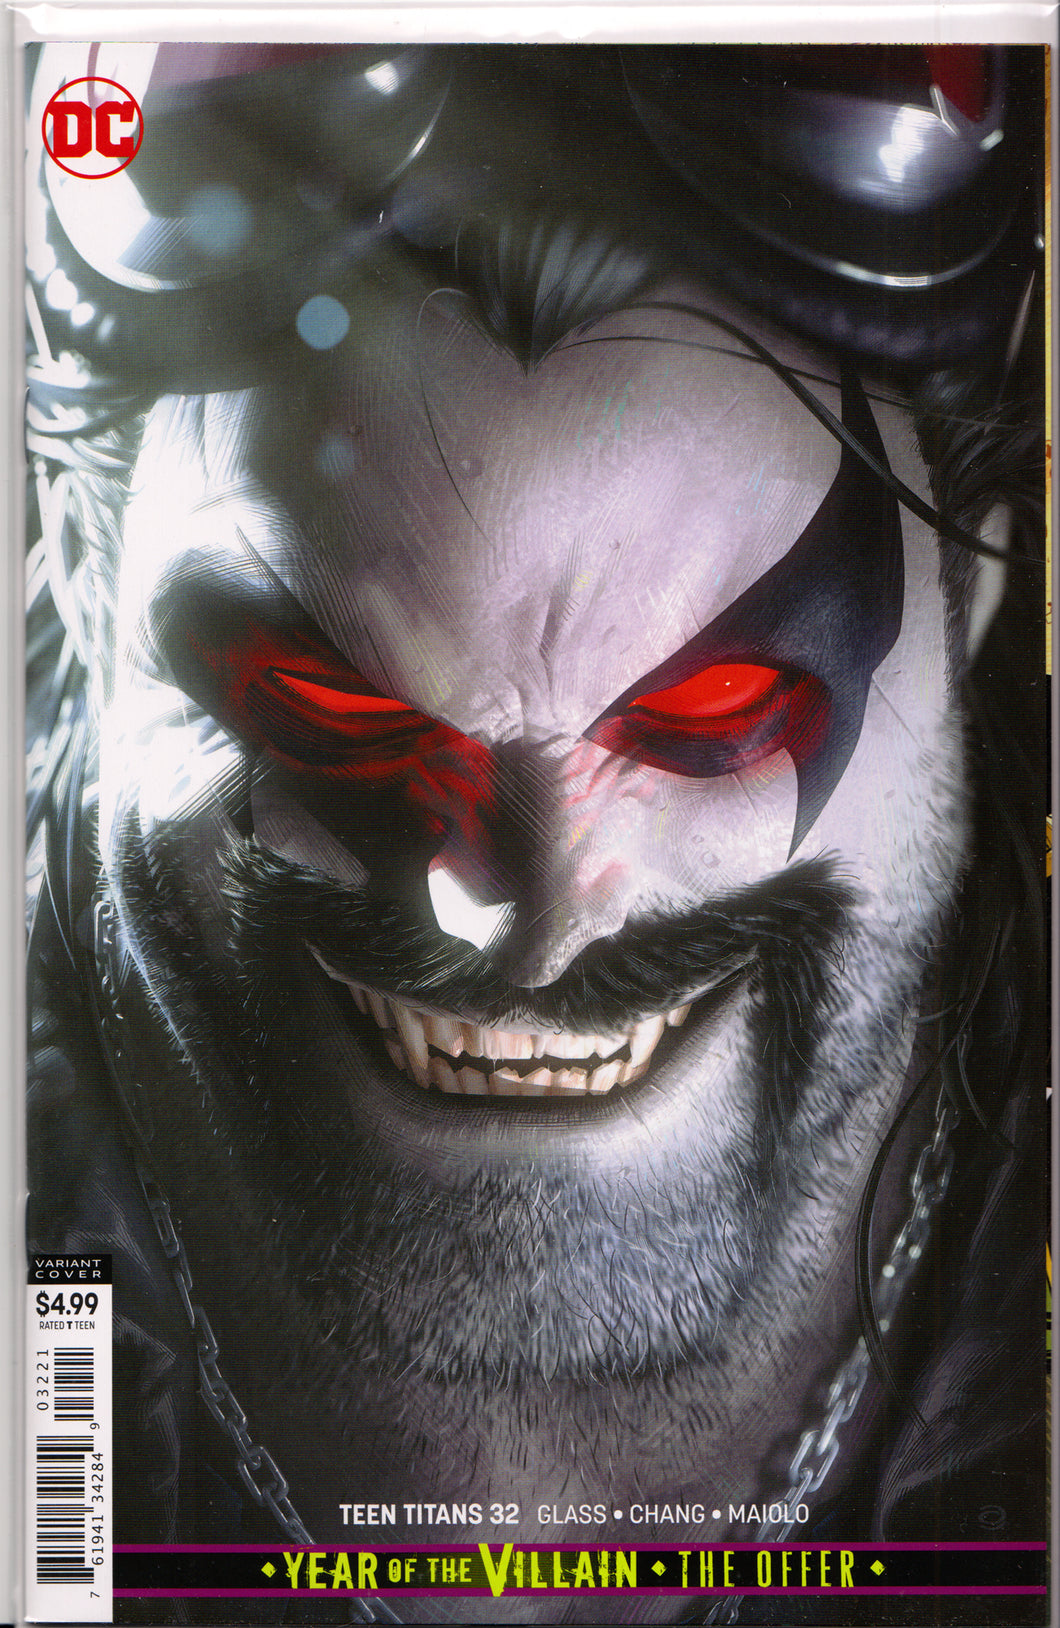 TEEN TITANS #32 (YEAR OF THE VILLAIN VARIANT COVER) ~ DC Comics